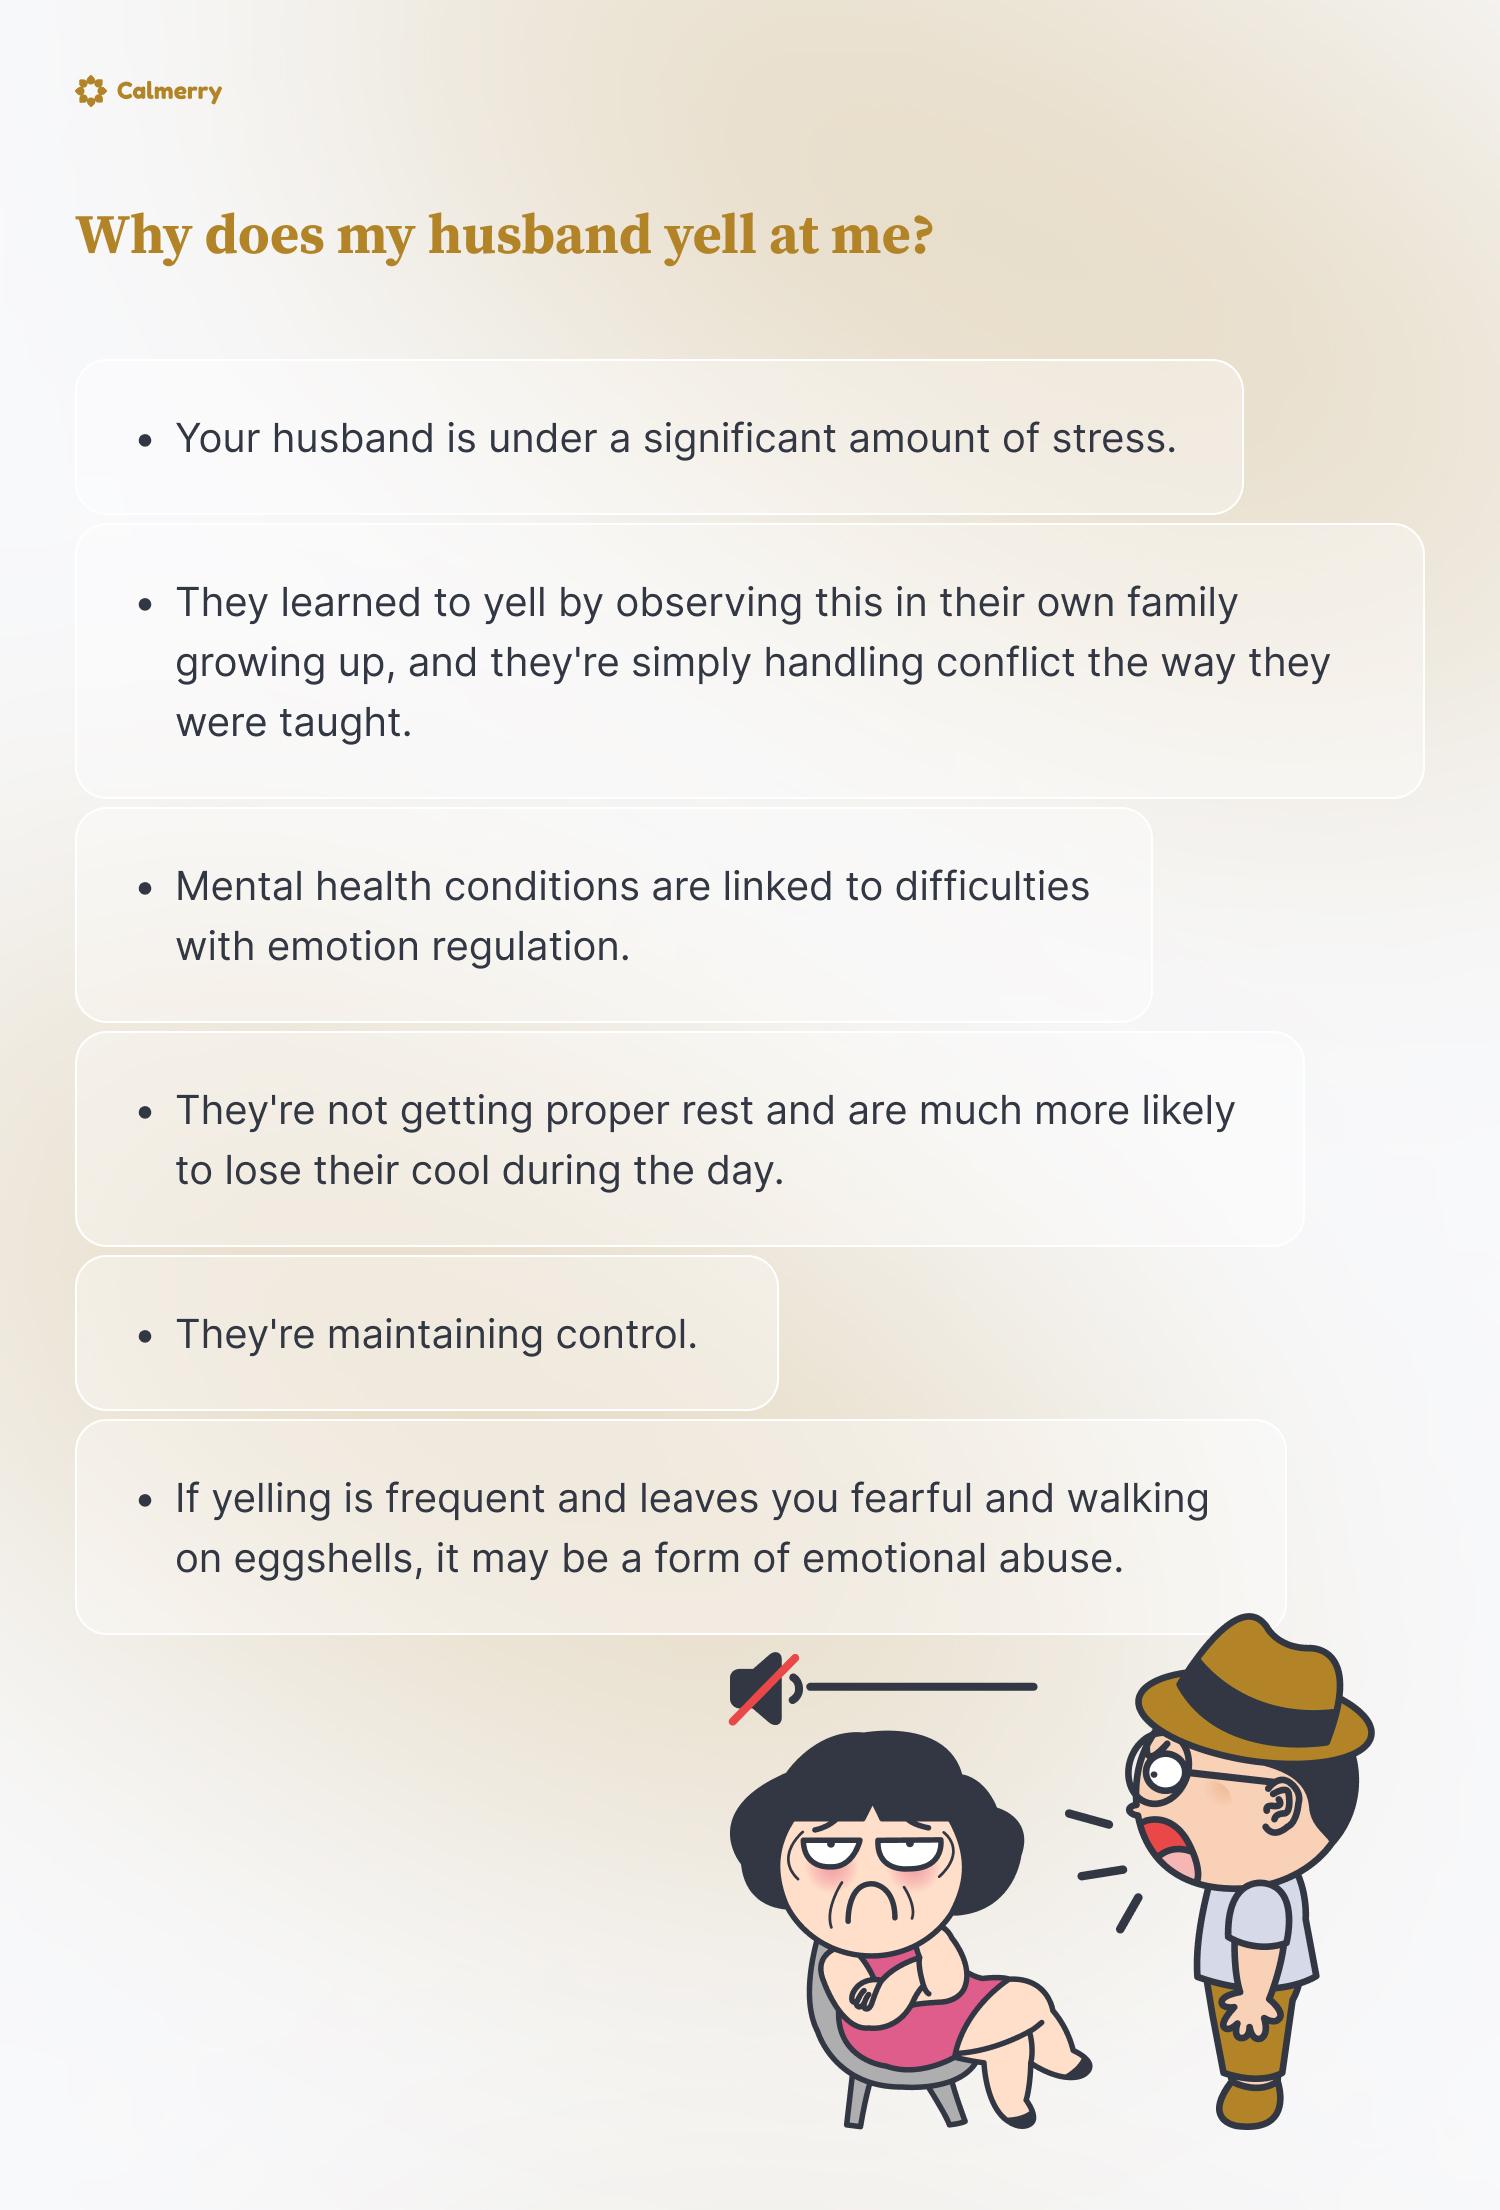 Why does my husband yell at me? Your husband is under a significant amount of stress. They learned to yell by observing this in their own family growing up, and they